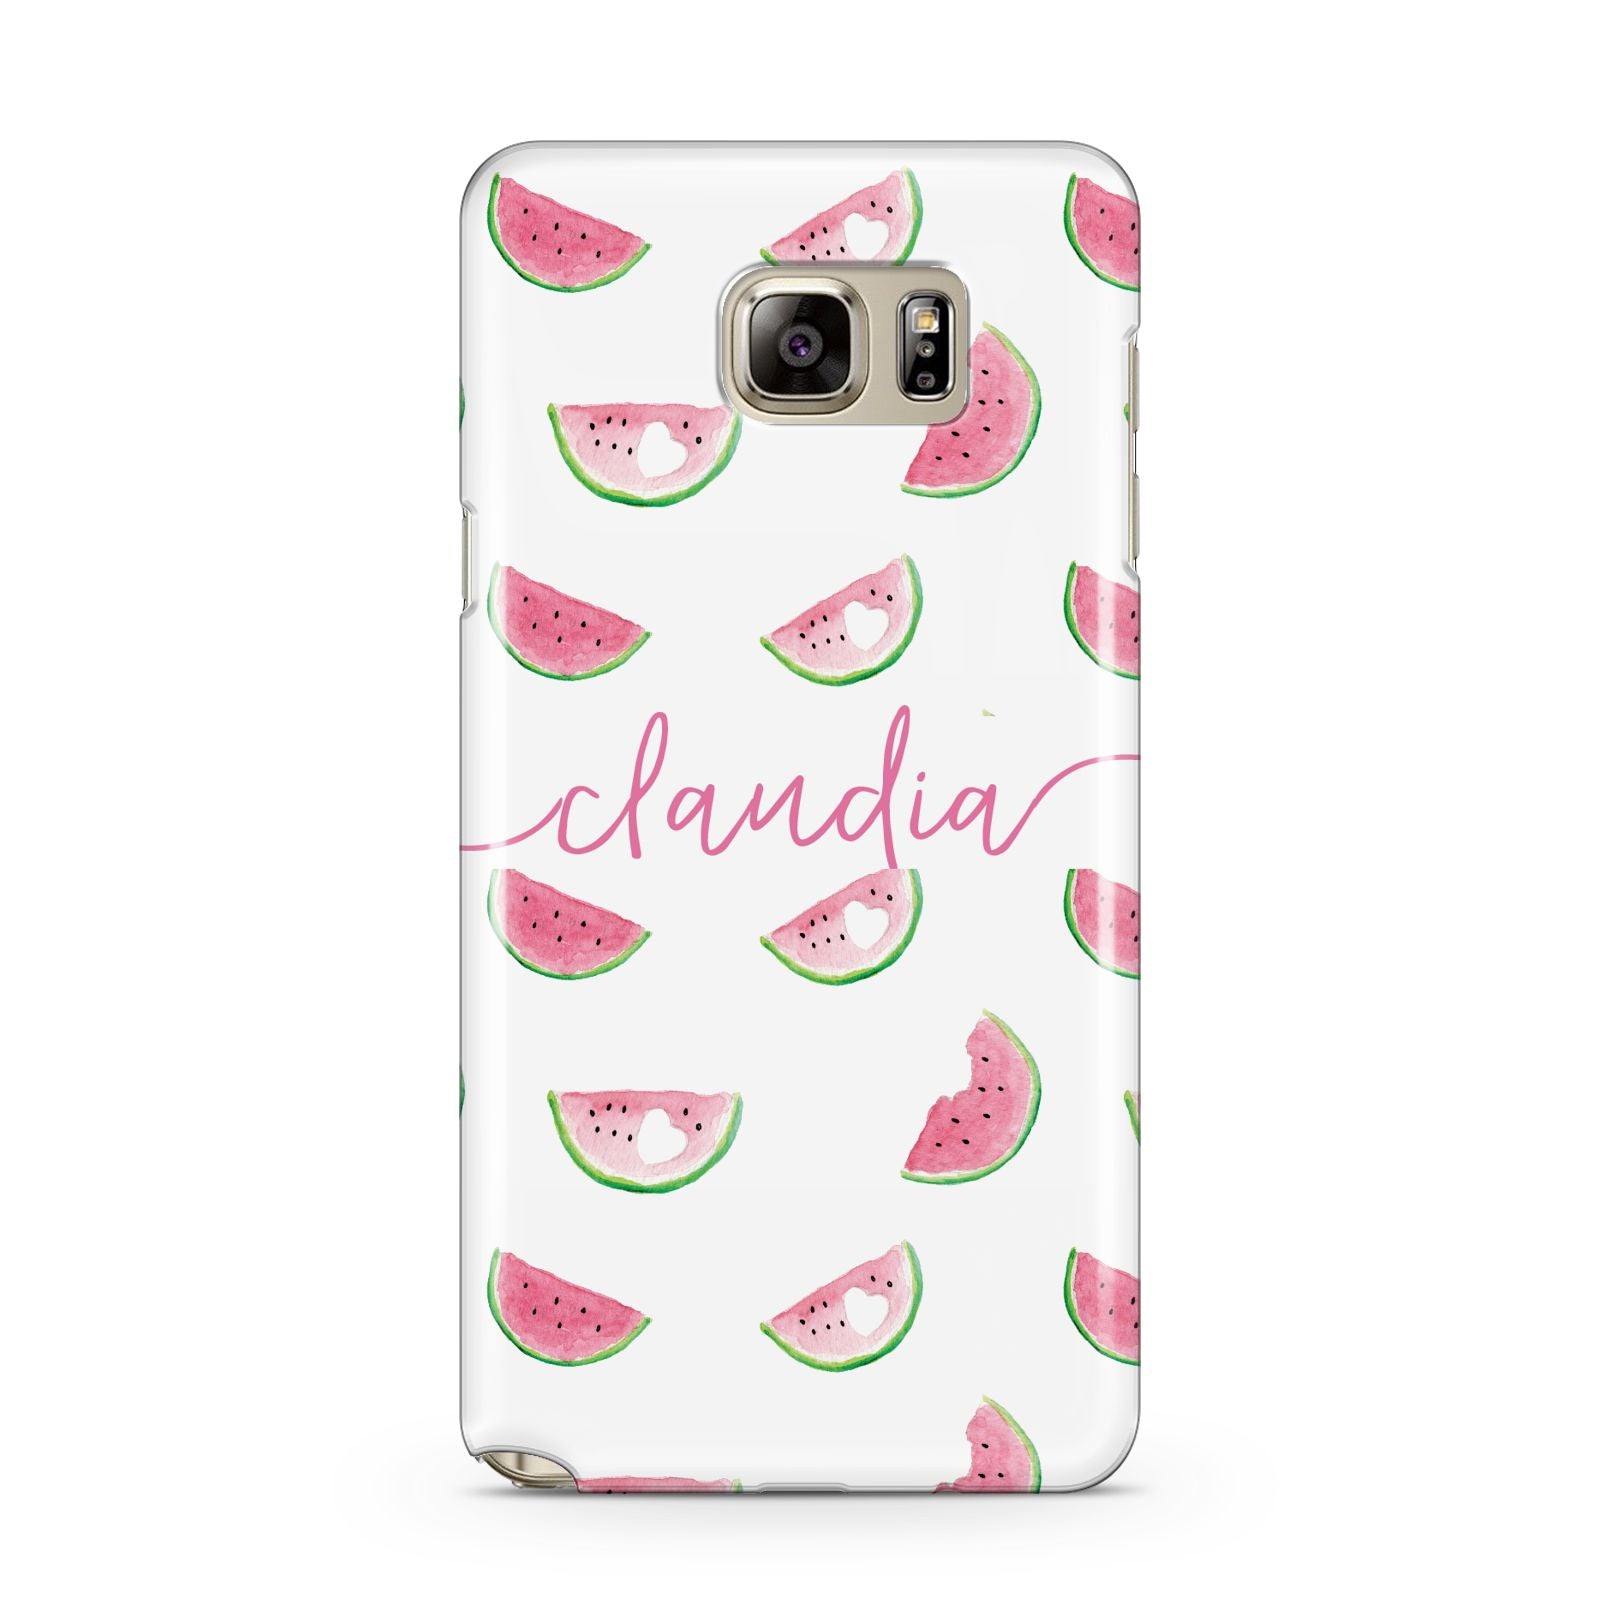 Personalised Transparent Watermelon Samsung Galaxy Note 5 Case